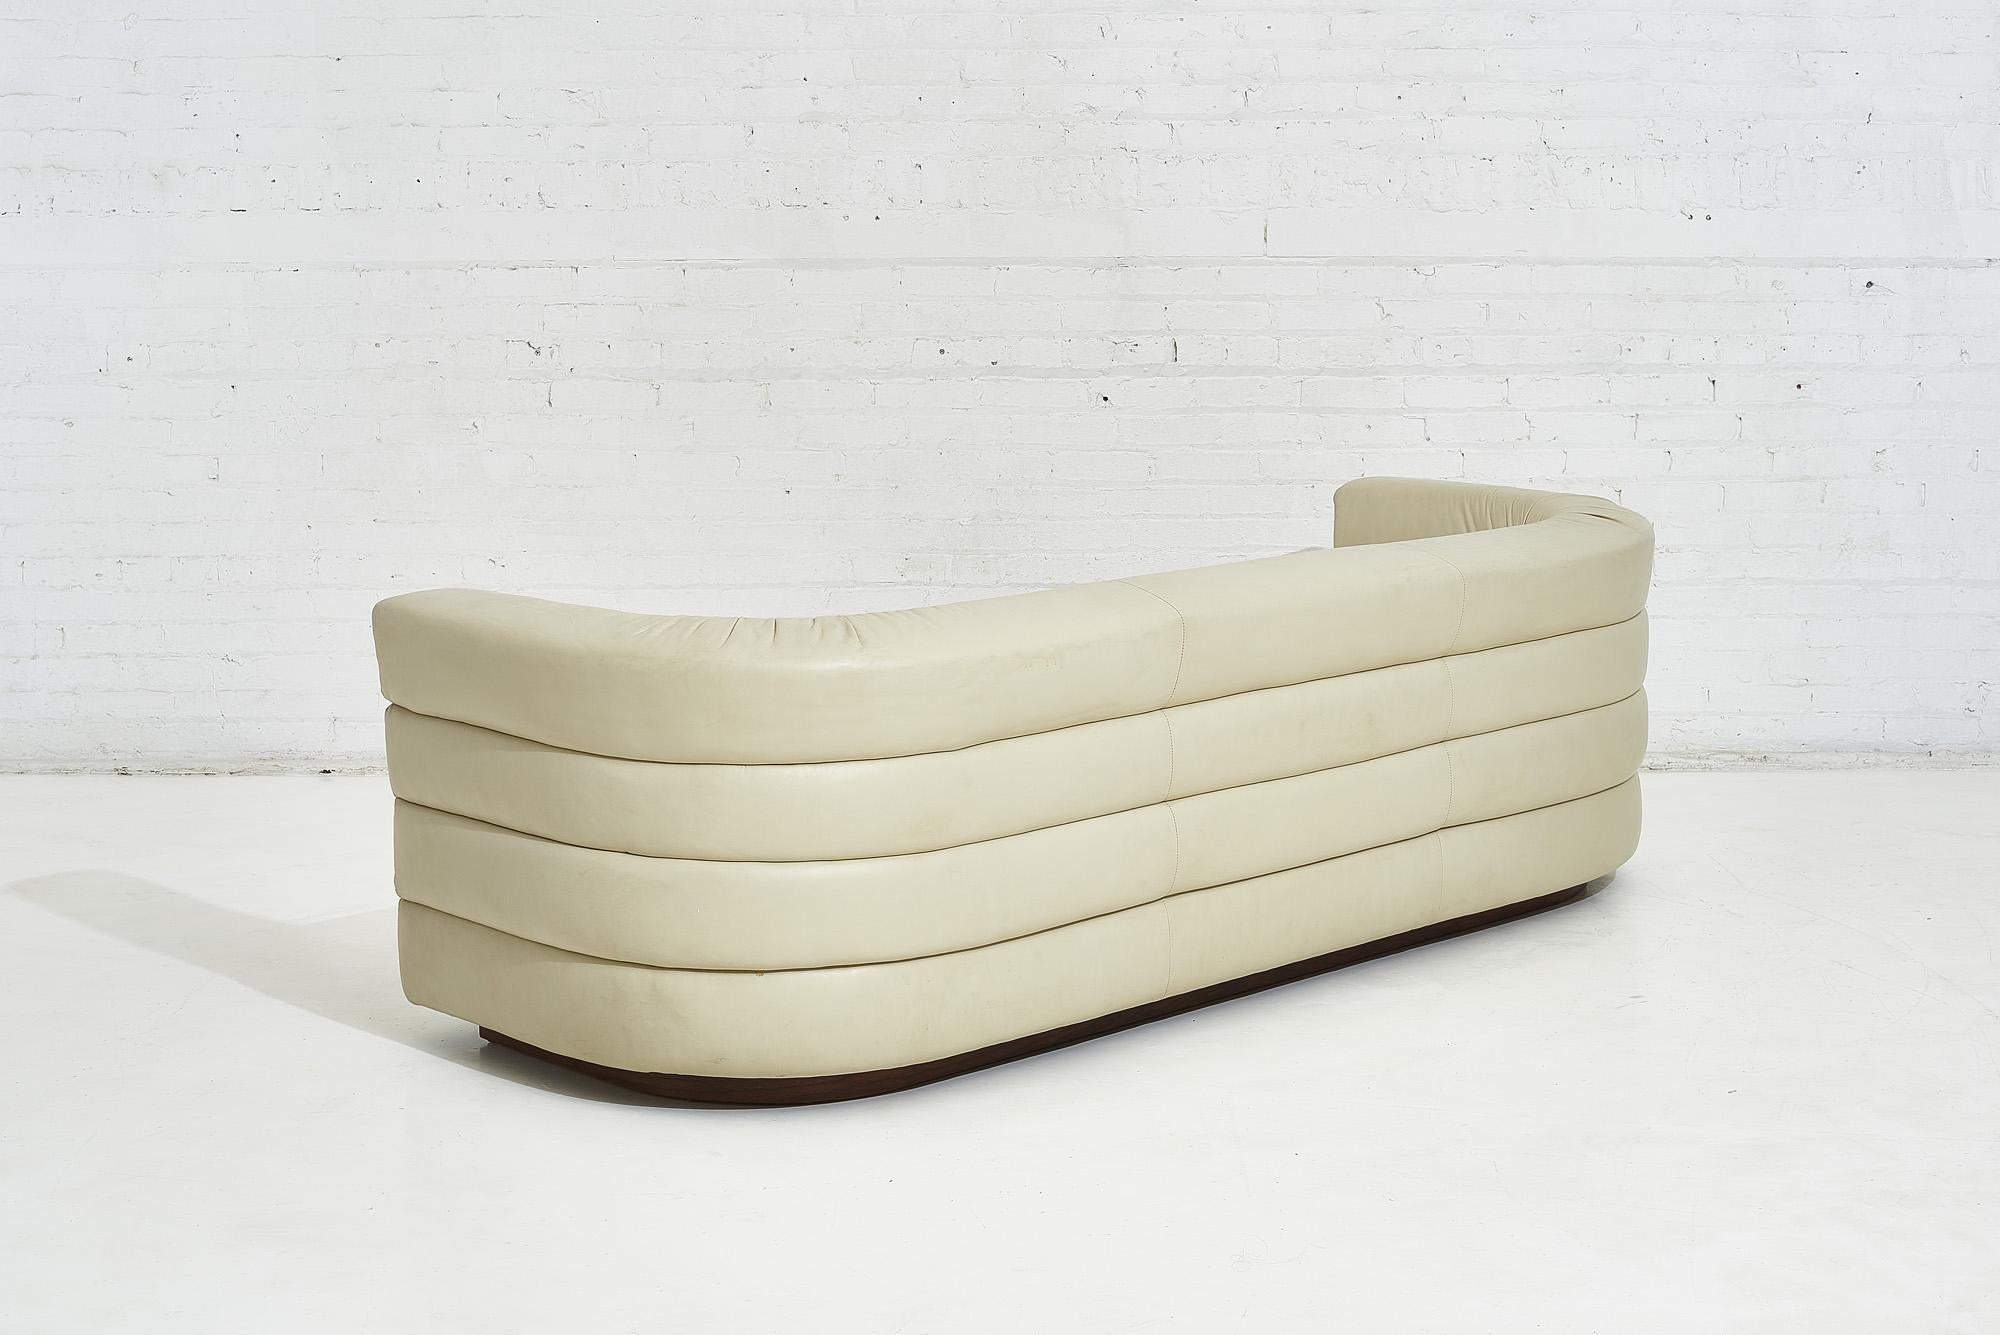 Late 20th Century Channel Stacked Leather Sofa by Interior Crafts, 1970’s